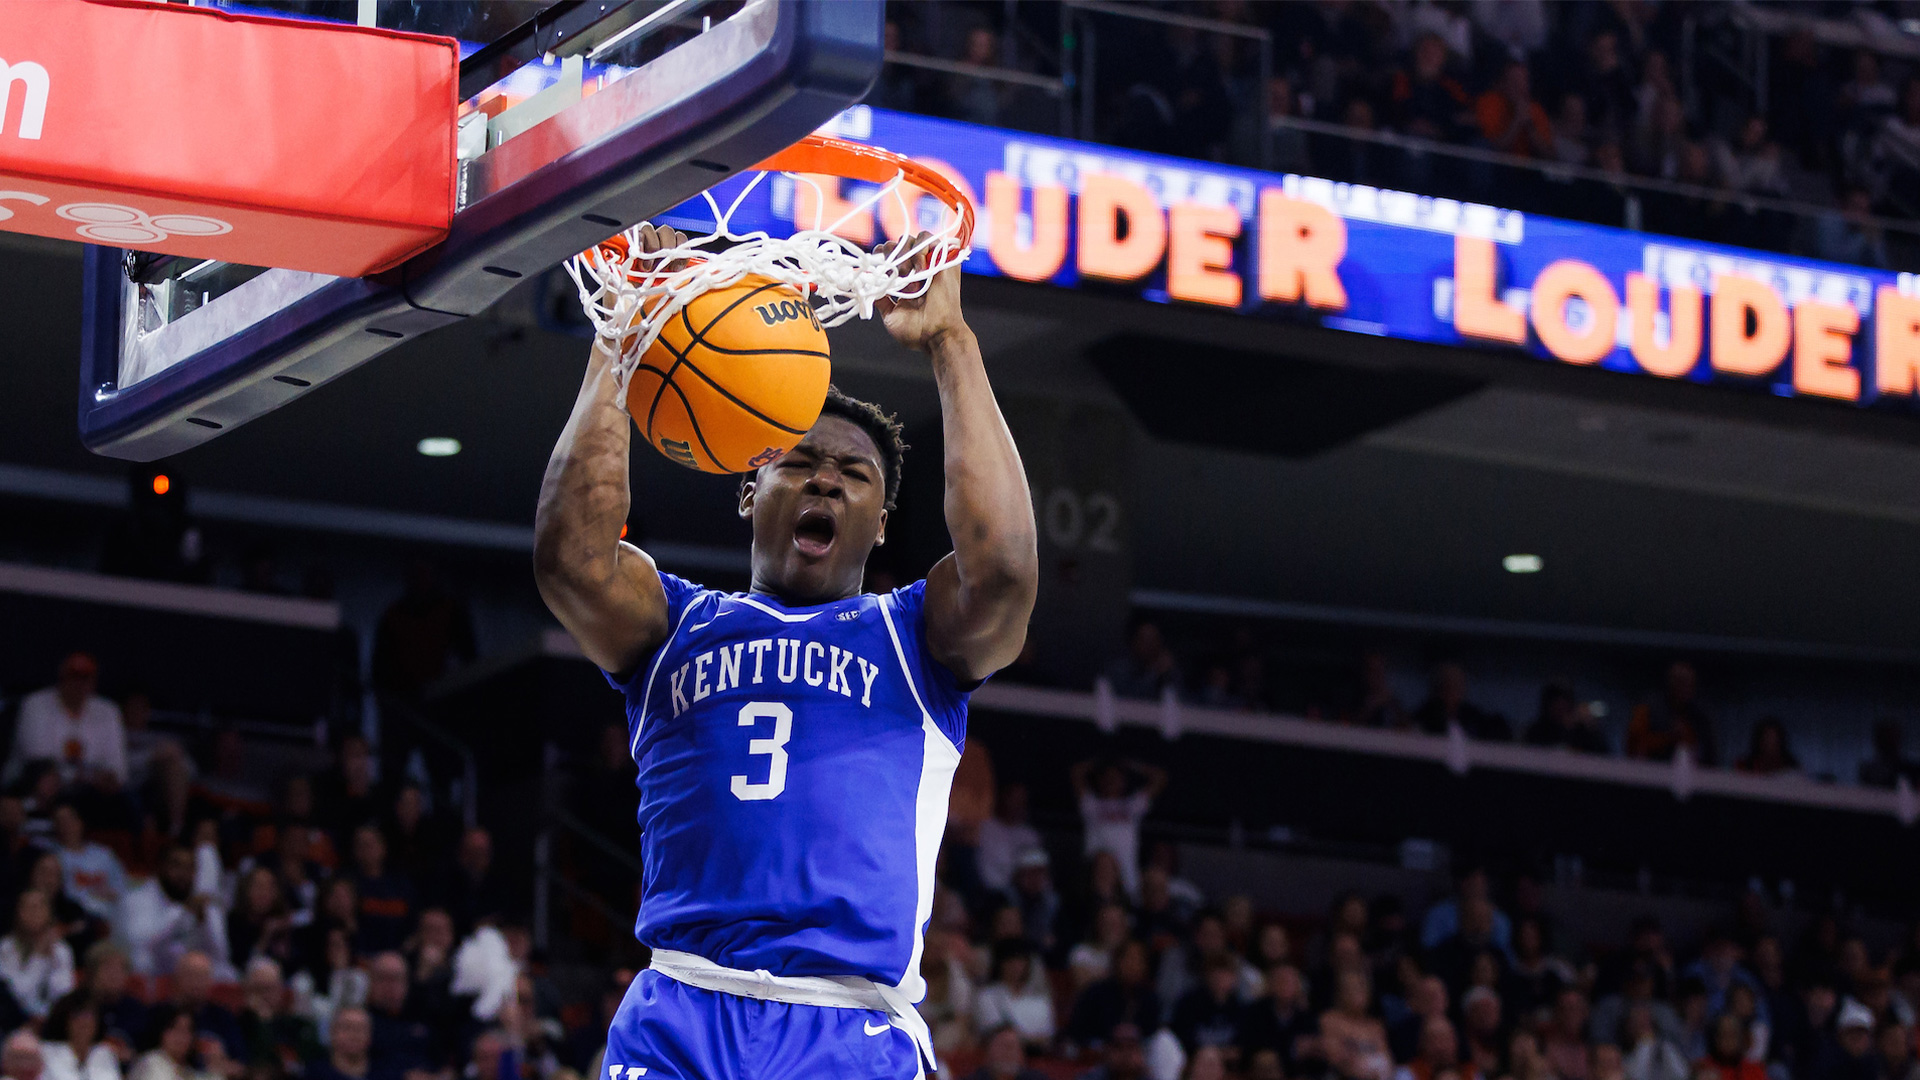 Leap Day: Some of the Biggest February Dunks in Recent KentuckyMBB History